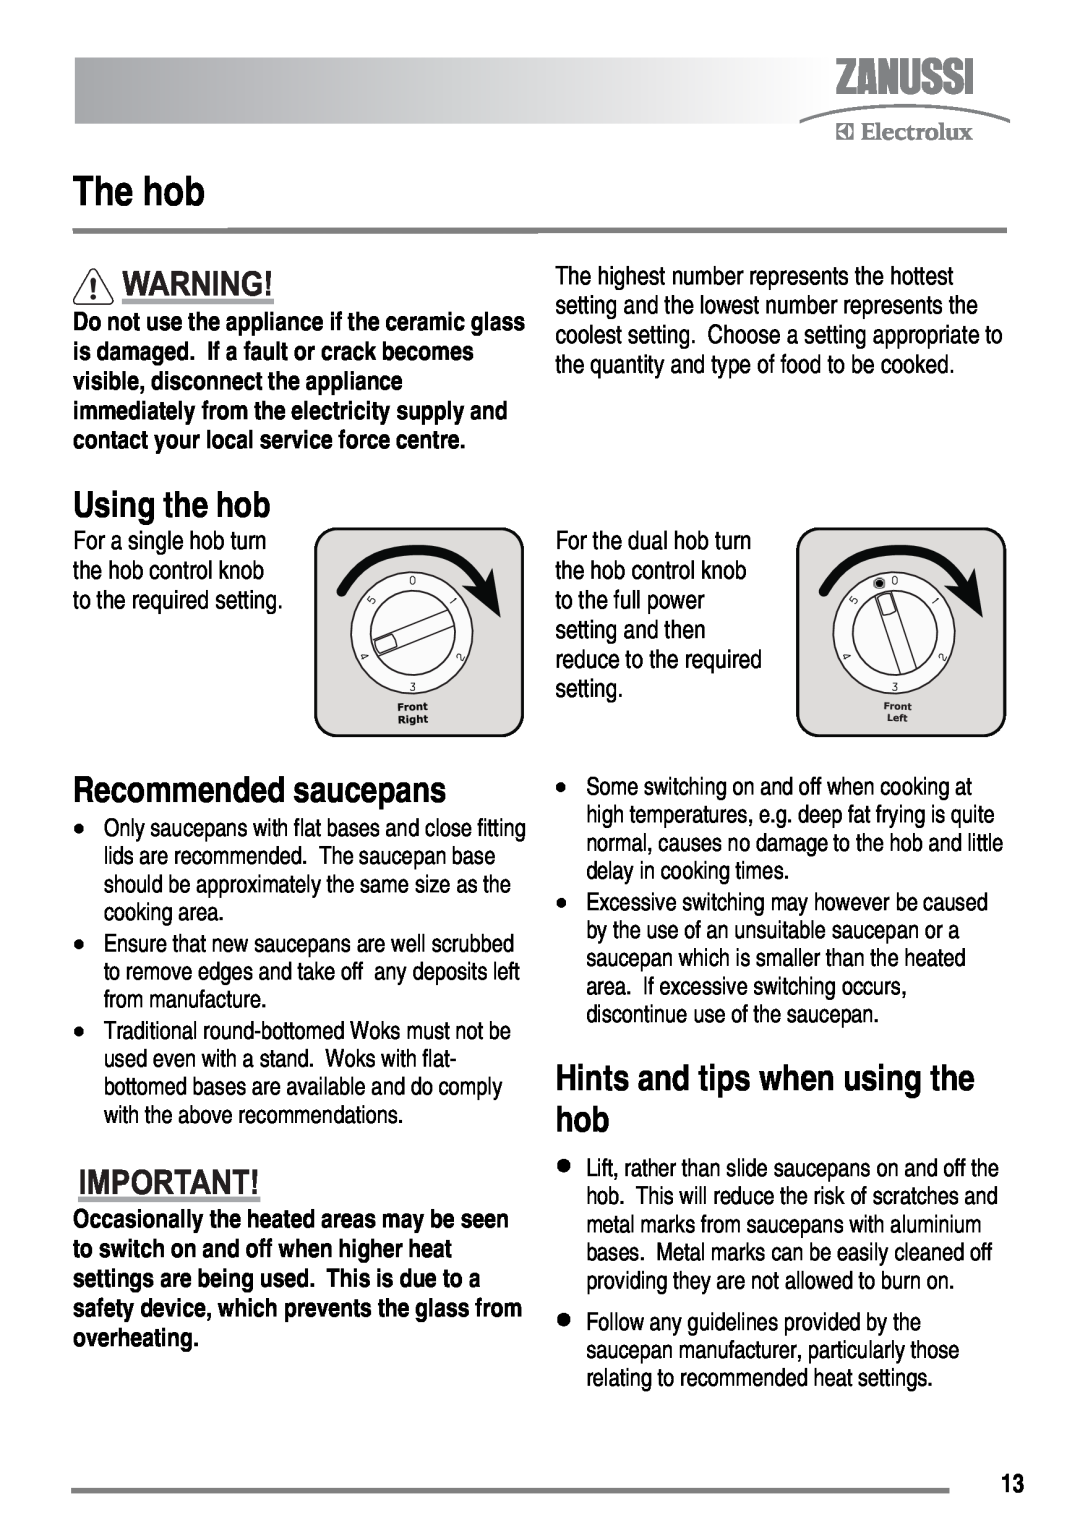 Zanussi ZKC6040 user manual The hob, Using the hob, Recommended saucepans, Hints and tips when using the hob 